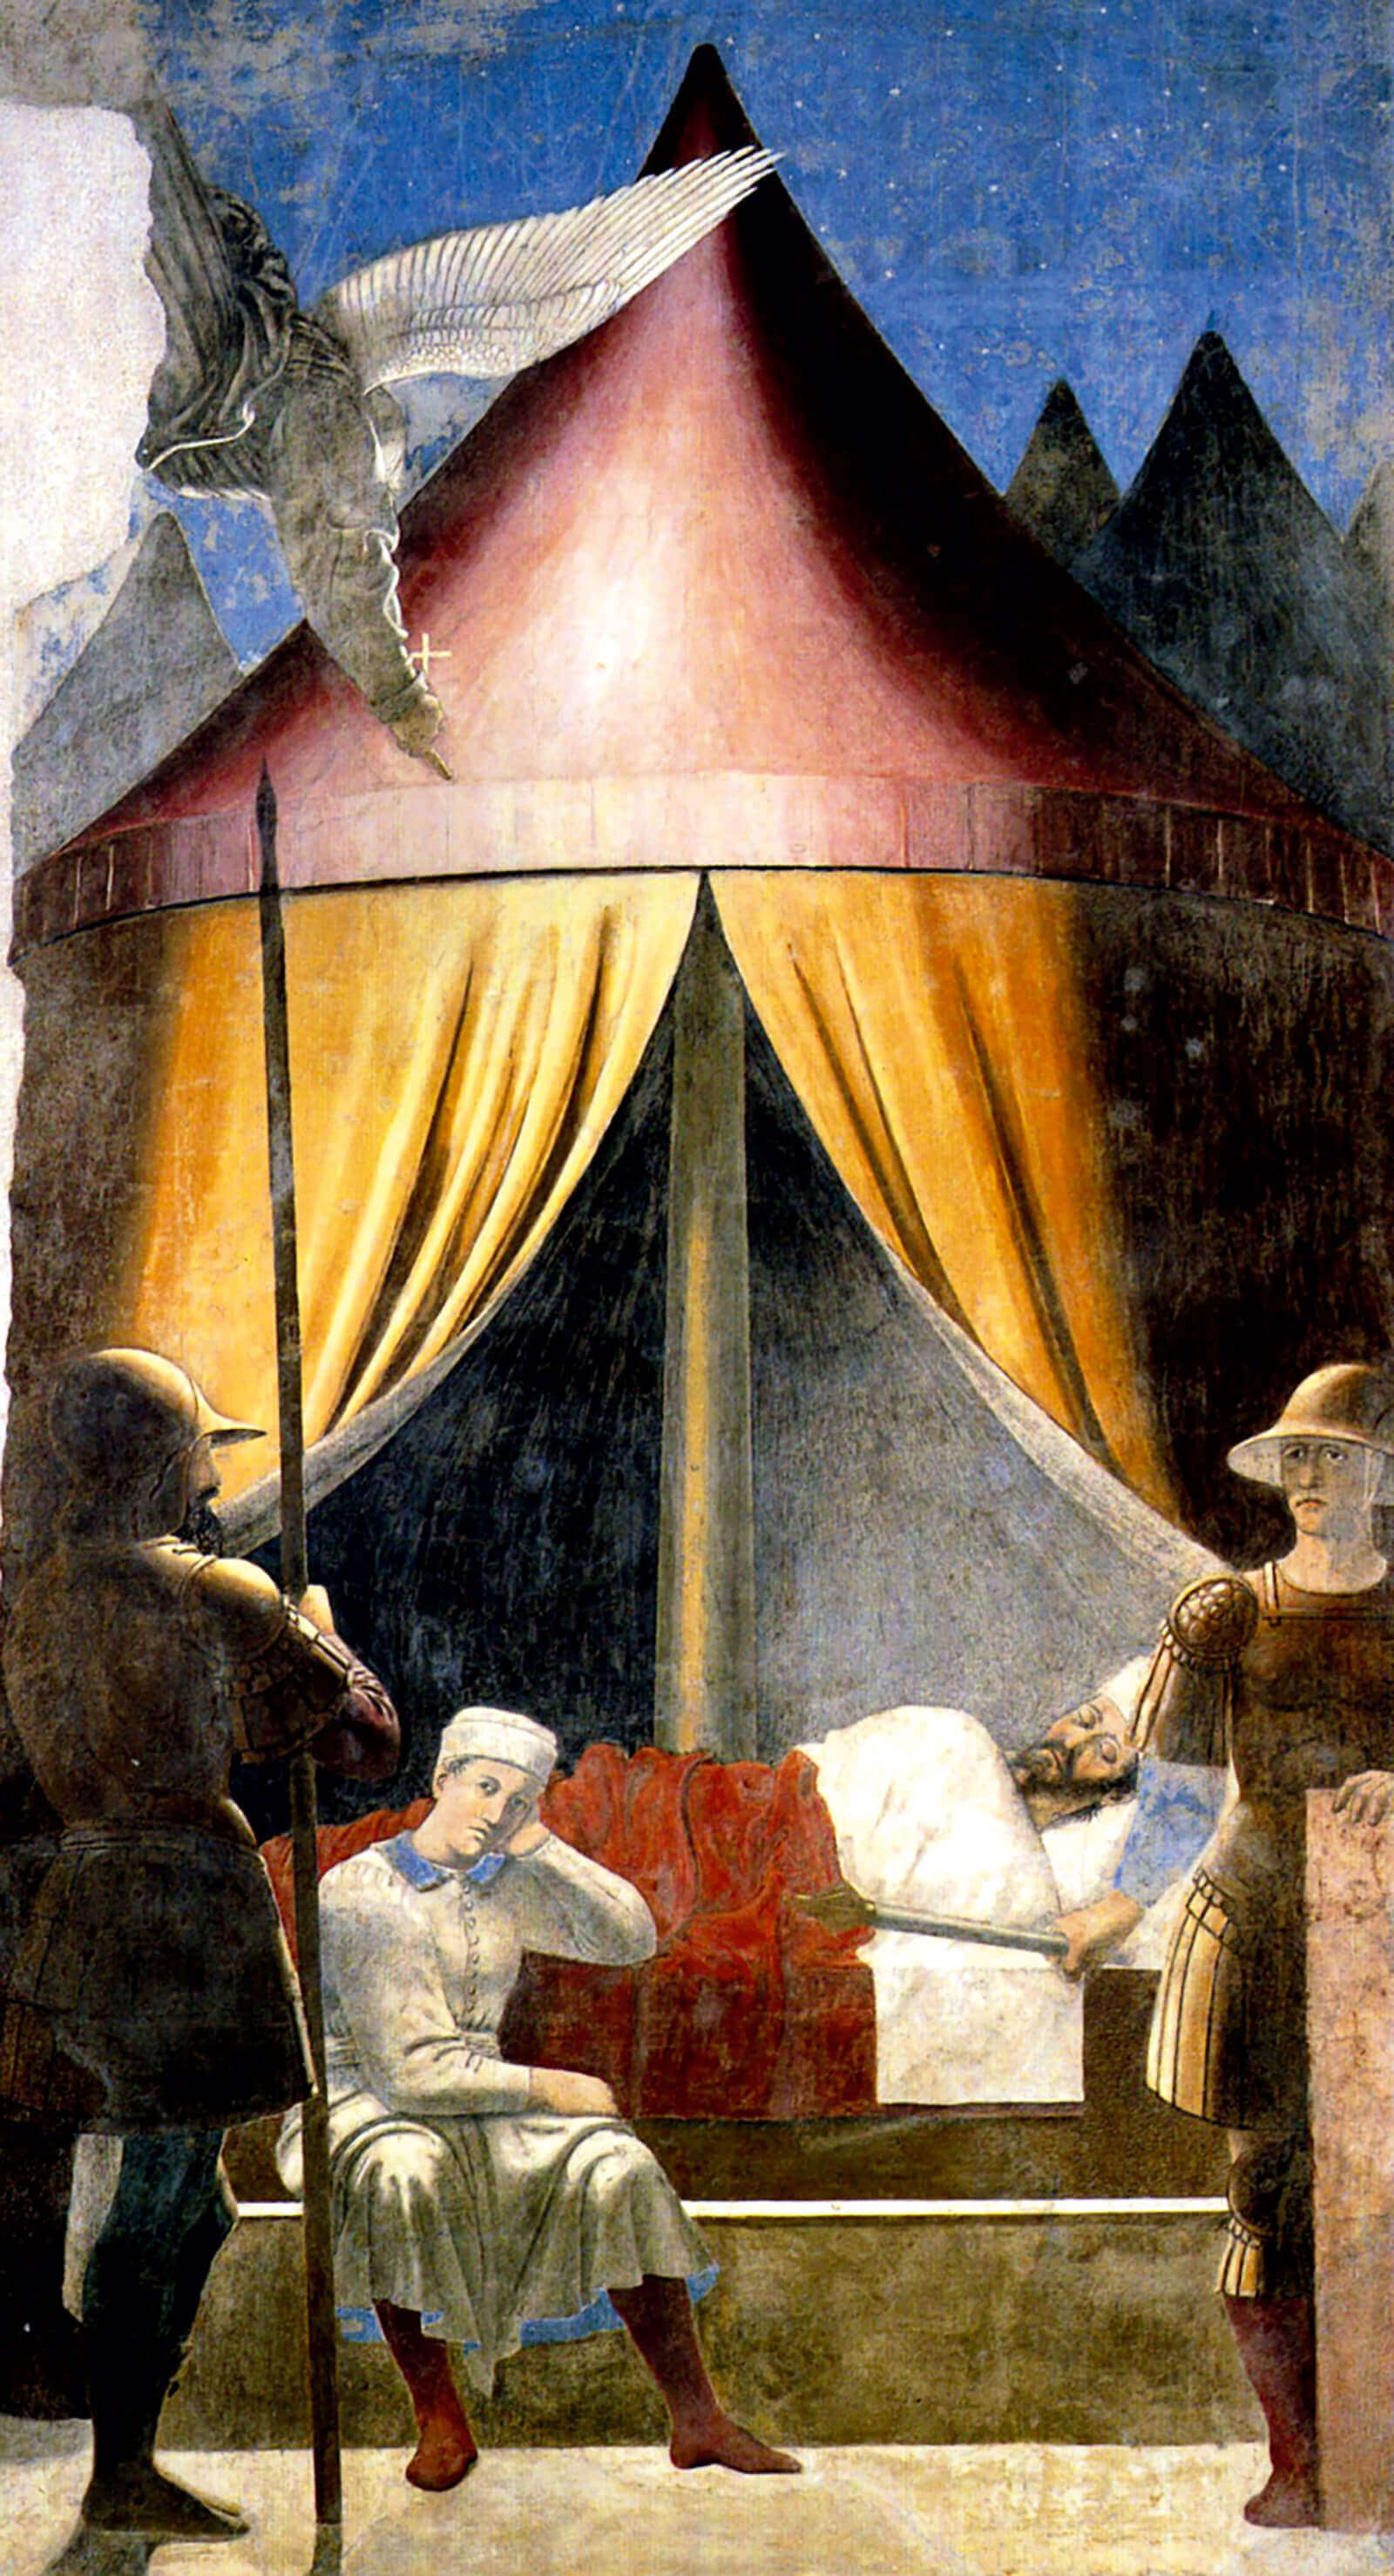 Piero della Francesca, Dream of Constantine, 1460s, located in Basilica di San Francesco, Arezzo, Italy. The fresco depicts one of the last pan-Mediterranean legends of dream sharing. In 312, the Emperor Constantine, on the eve of the Battle of the Milvian Bridge with his rival Maxentius, is said to have dreamt of a cross emblazoned with the words, “By this sign you will conquer.” Victorious, he would convert himself, and the Roman Empire, to Christianity.